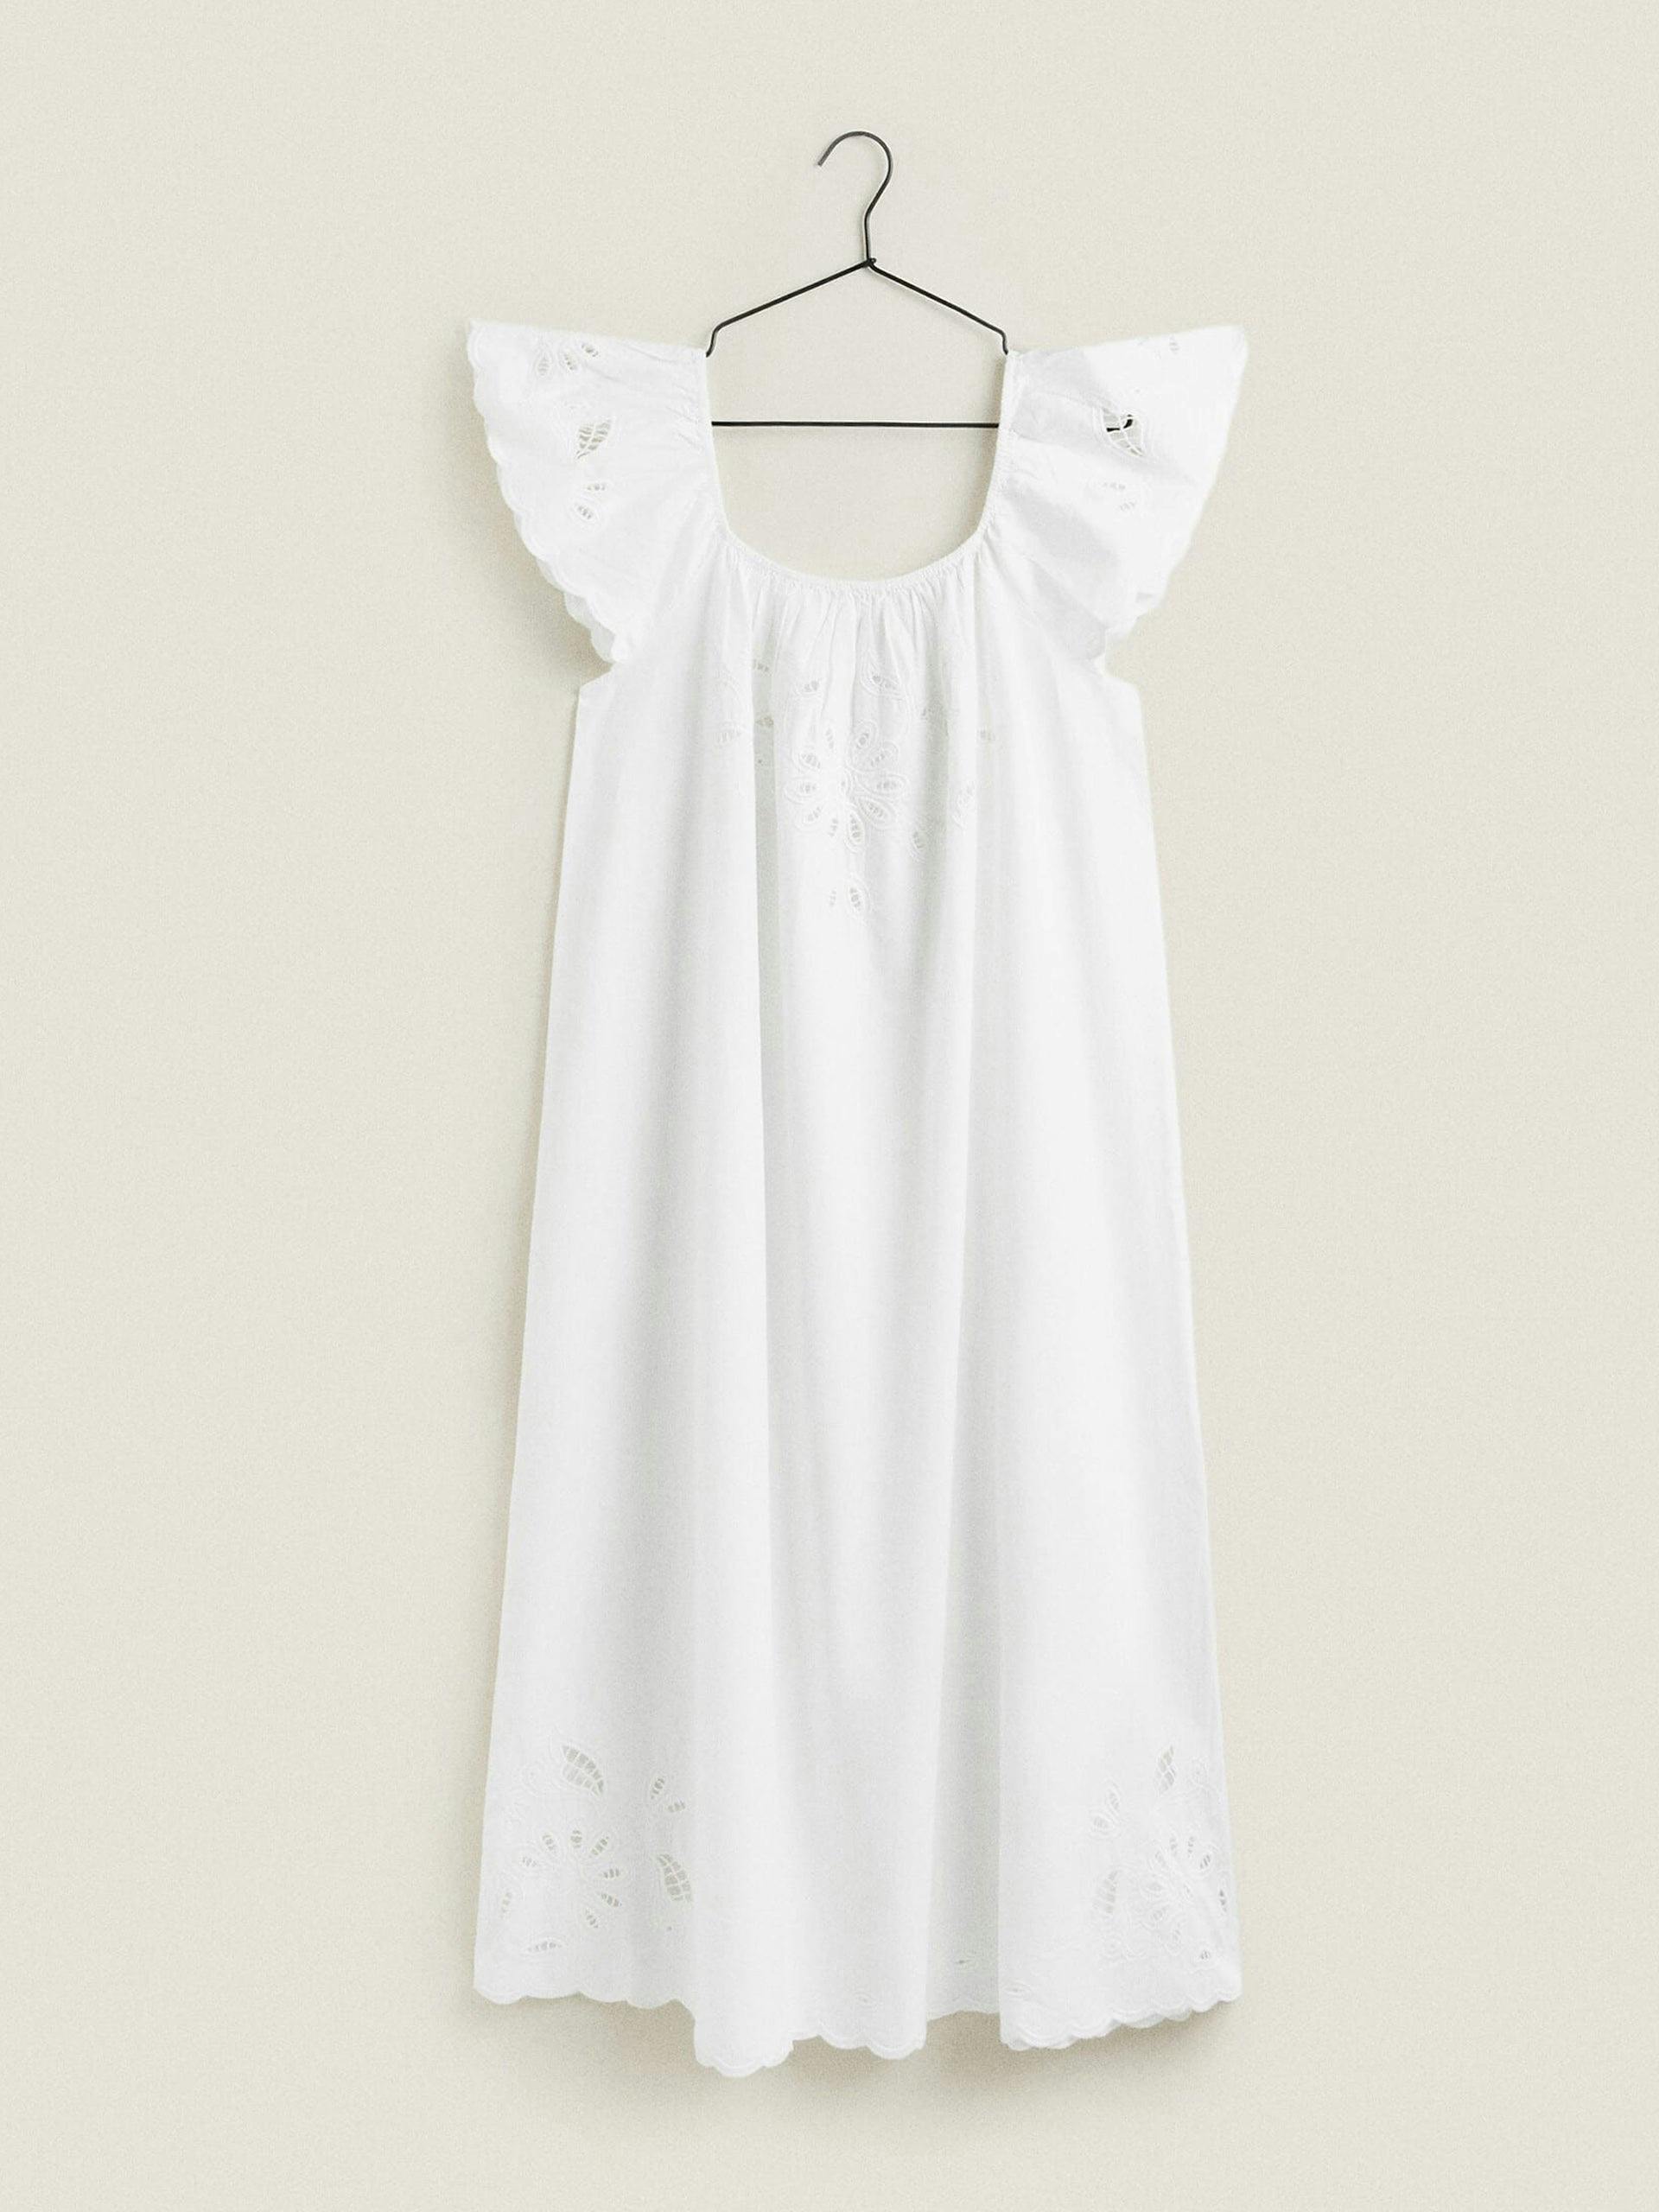 White embroidered nightdress